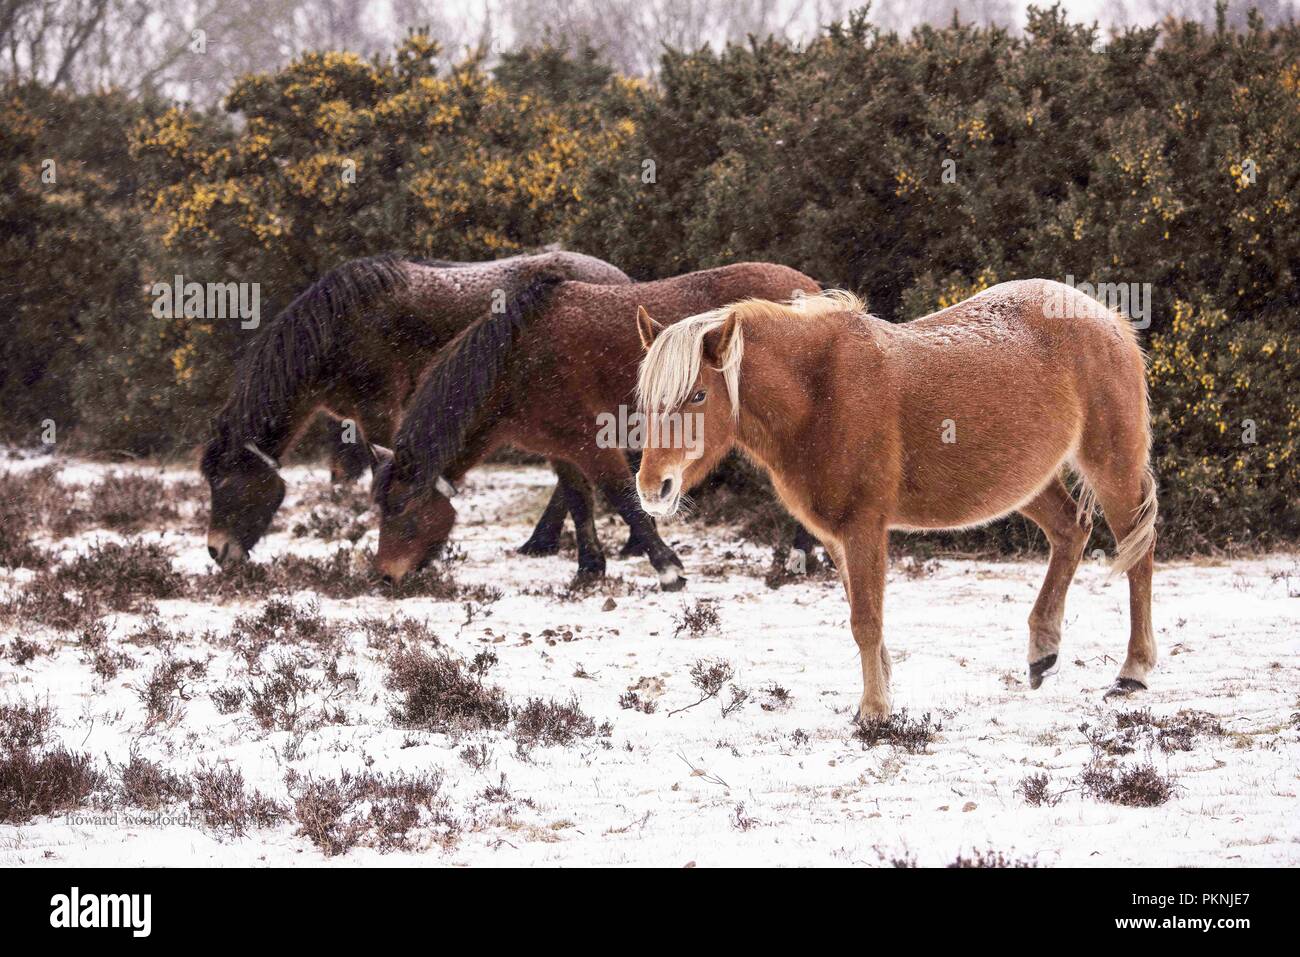 Winter scenes, the iconic New Forest: Ponies amidst a Snowy Landscape, Pitmore Lane, Sway taken in March 2018 Stock Photo